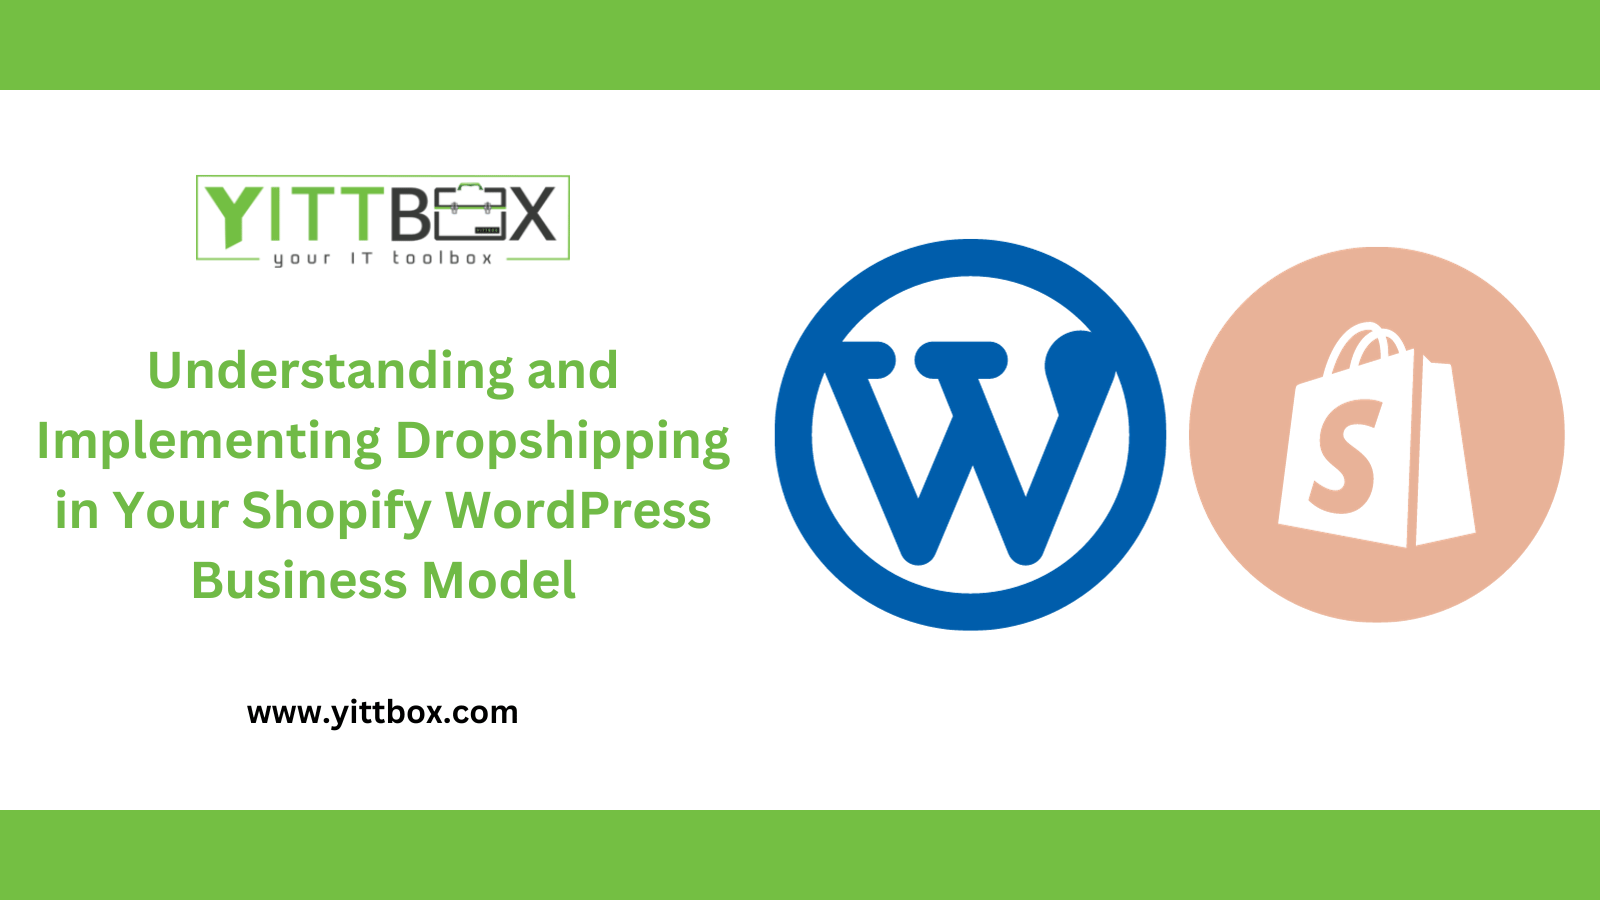 Understanding and Implementing Dropshipping in Your Shopify/WordPress Business Model